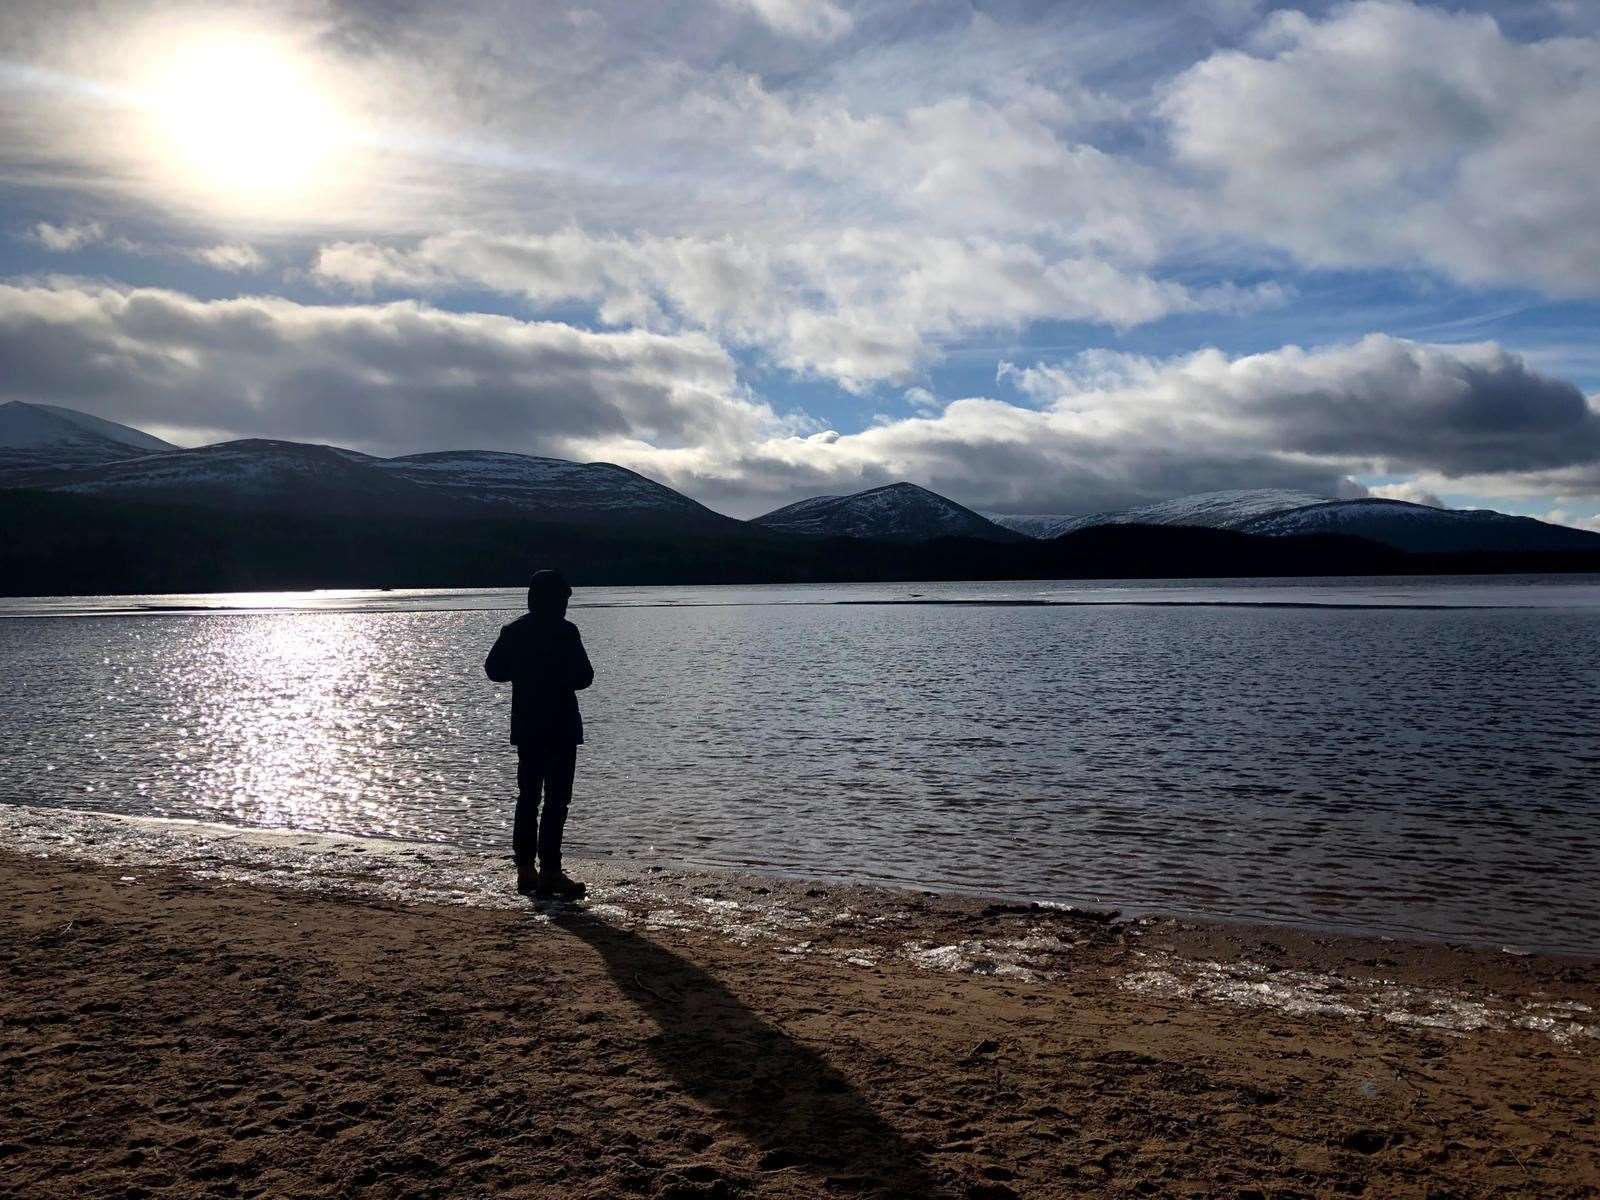 Mikey pictured on his final visit to Loch Morlich two years ago